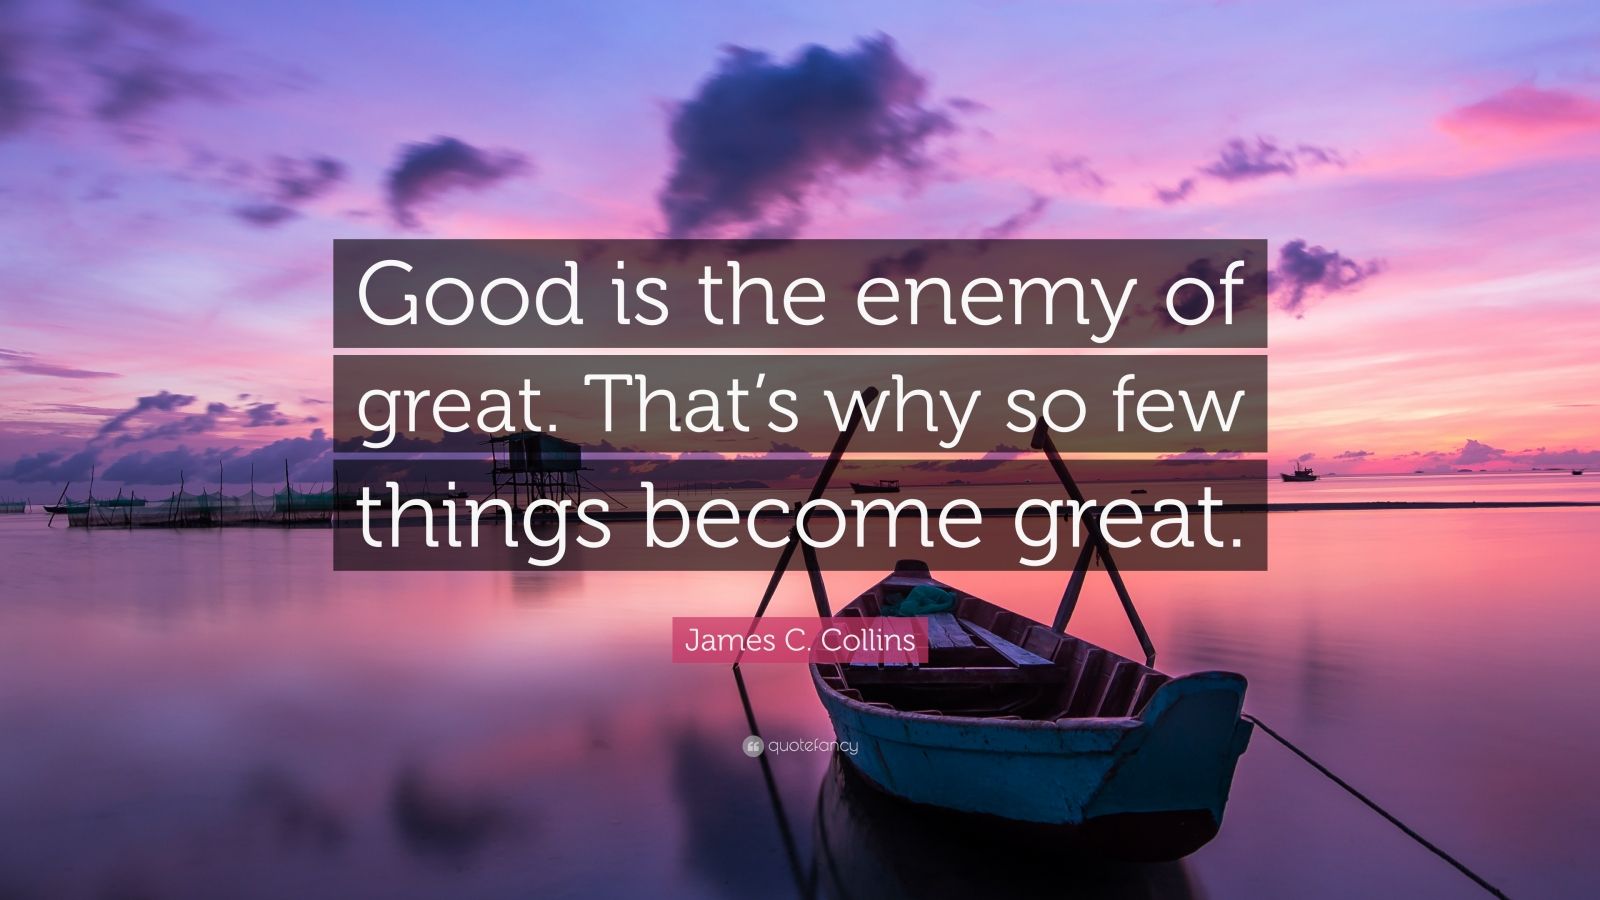 Good to Great by James C. Collins